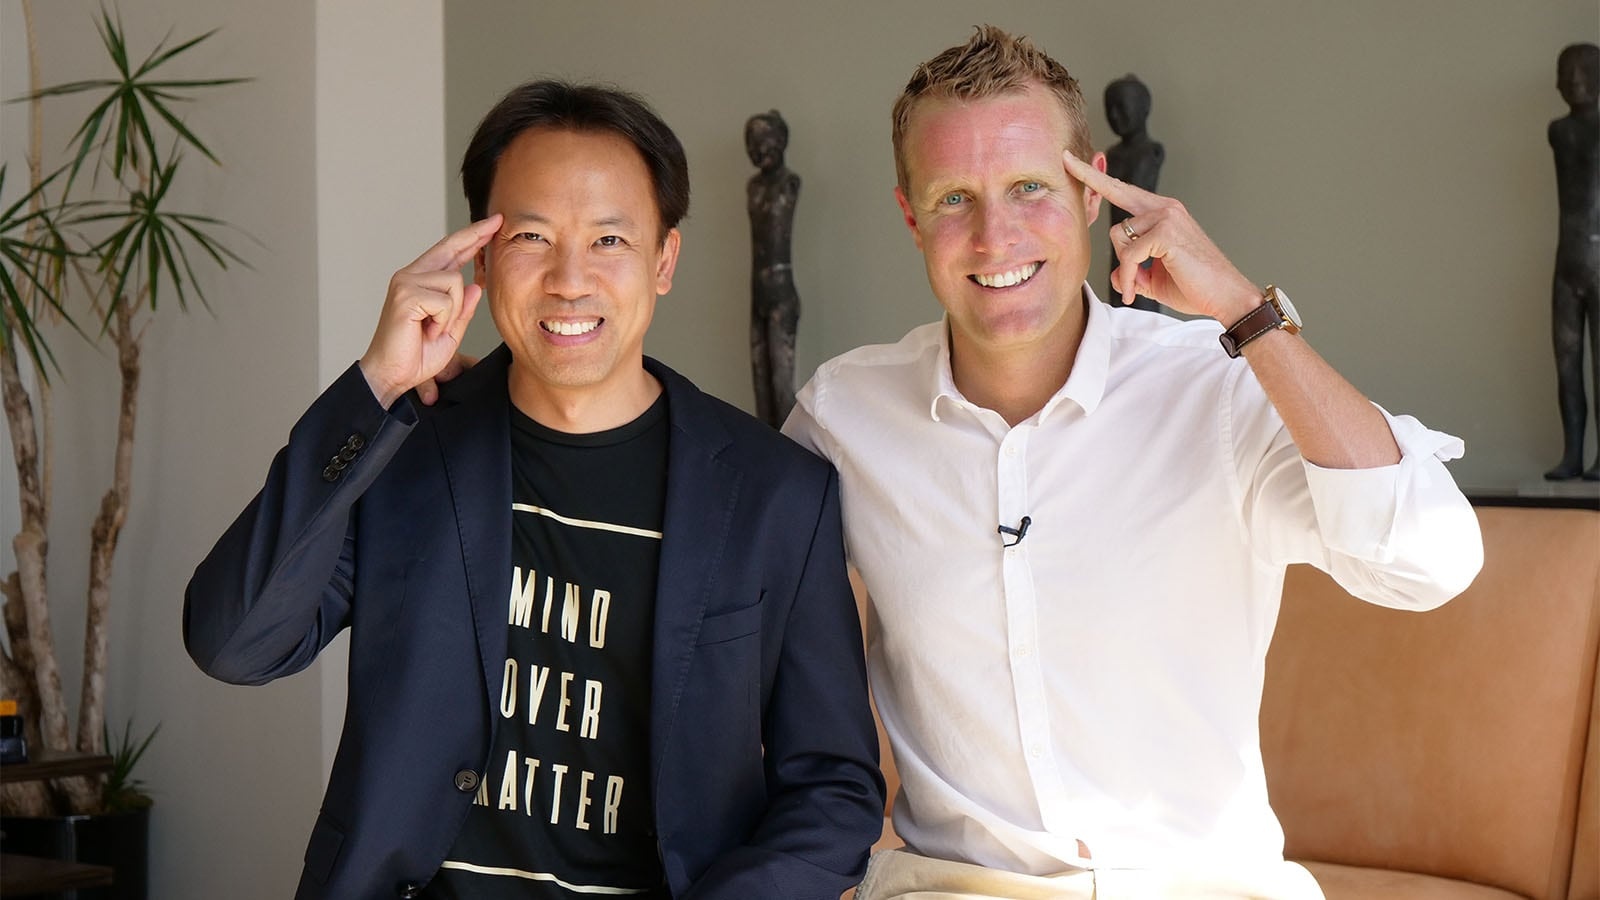 Episode 4: How 'The Boy With The Broken Brain' Became A World Leader In Learning with Jim Kwik